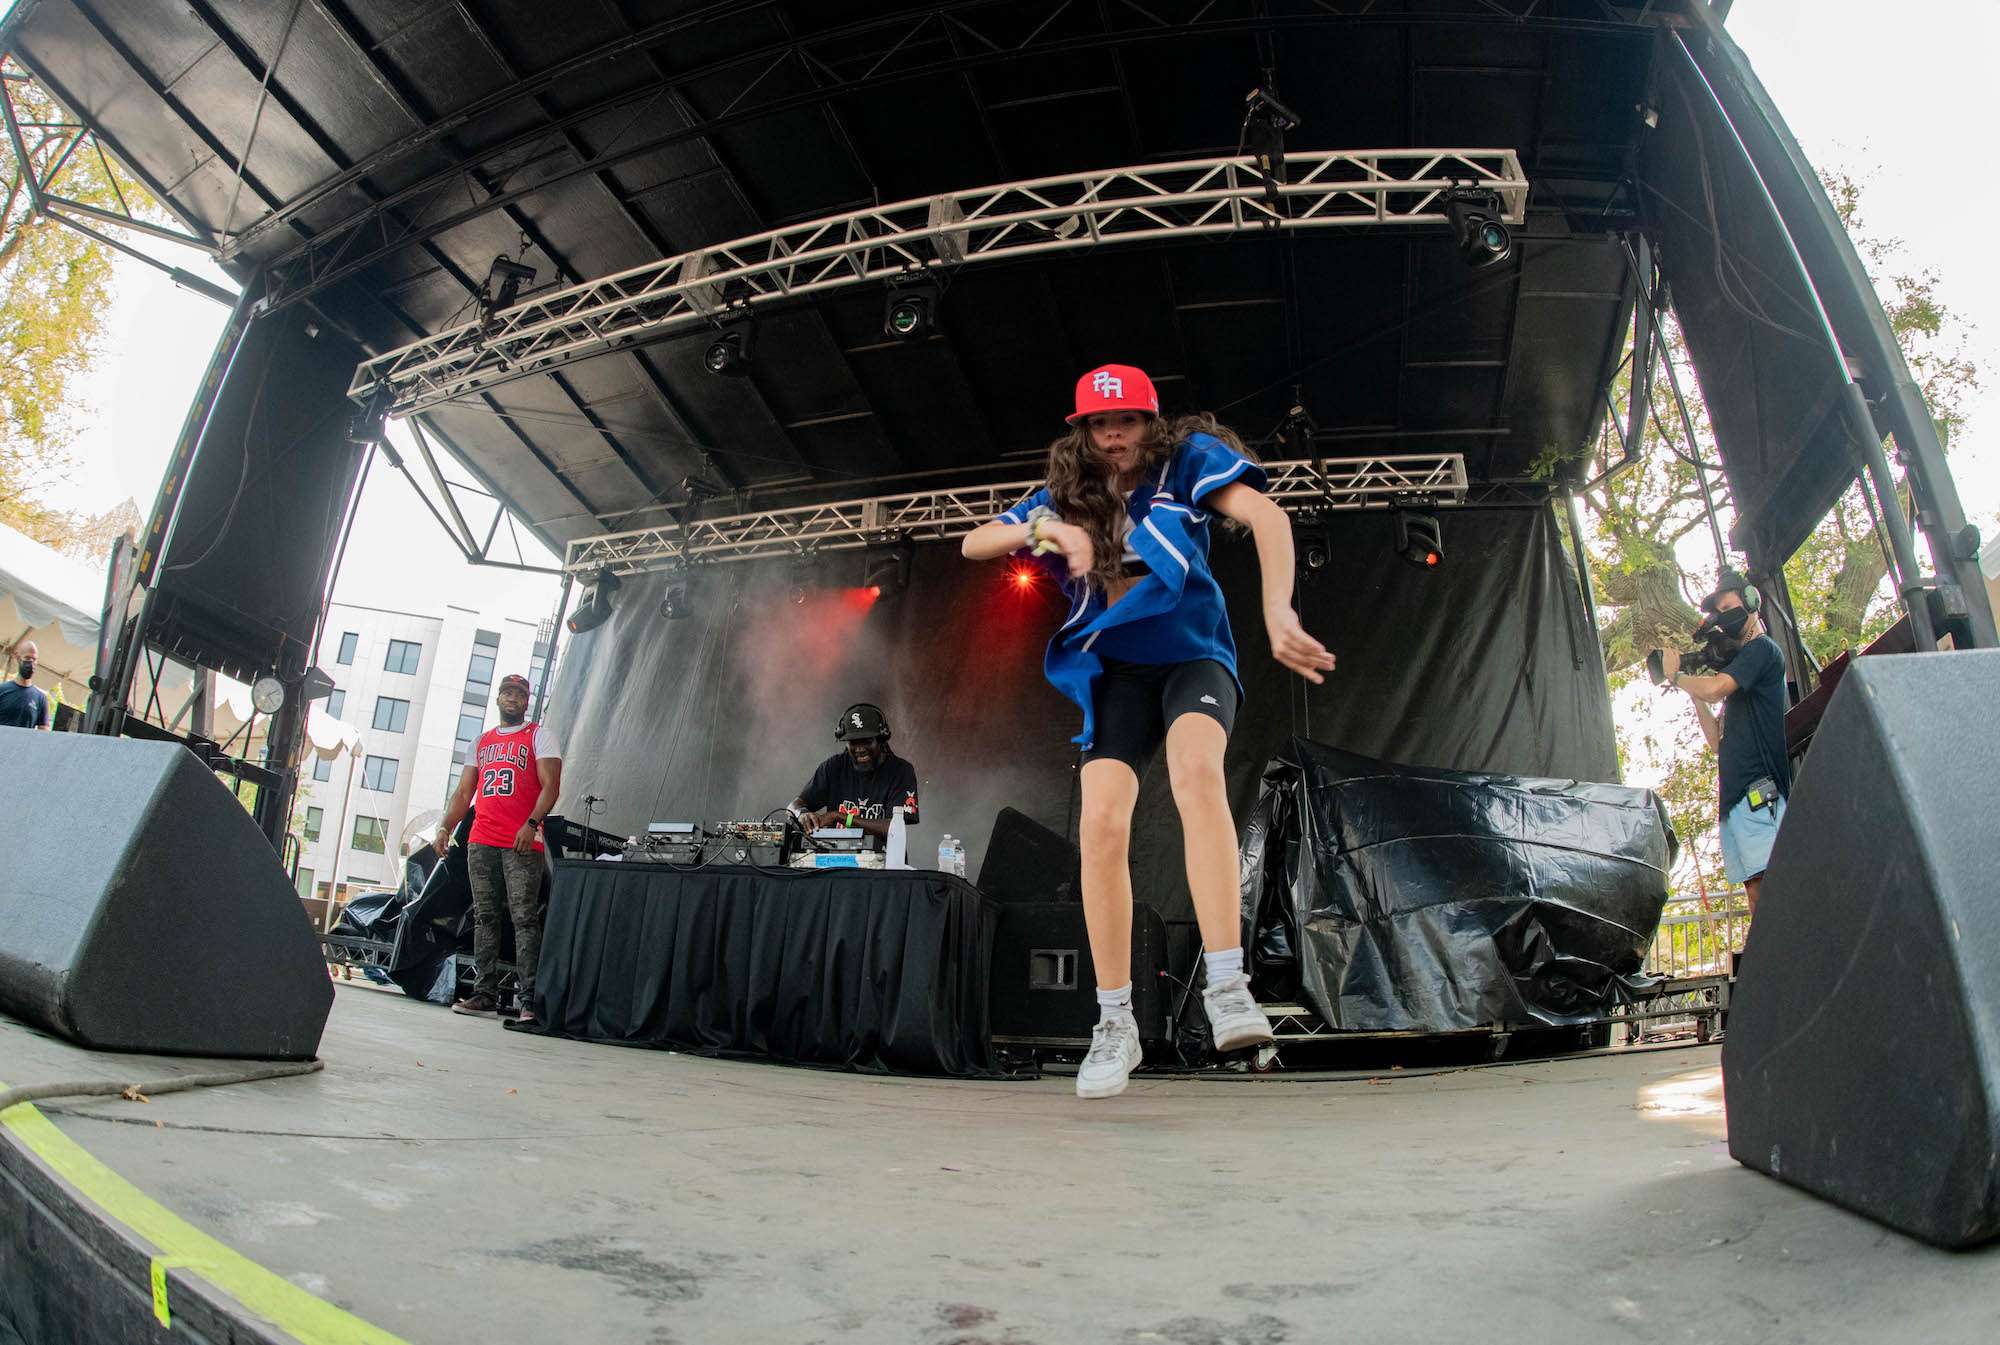 RP Boo Live at Pitchfork [GALLERY] 5